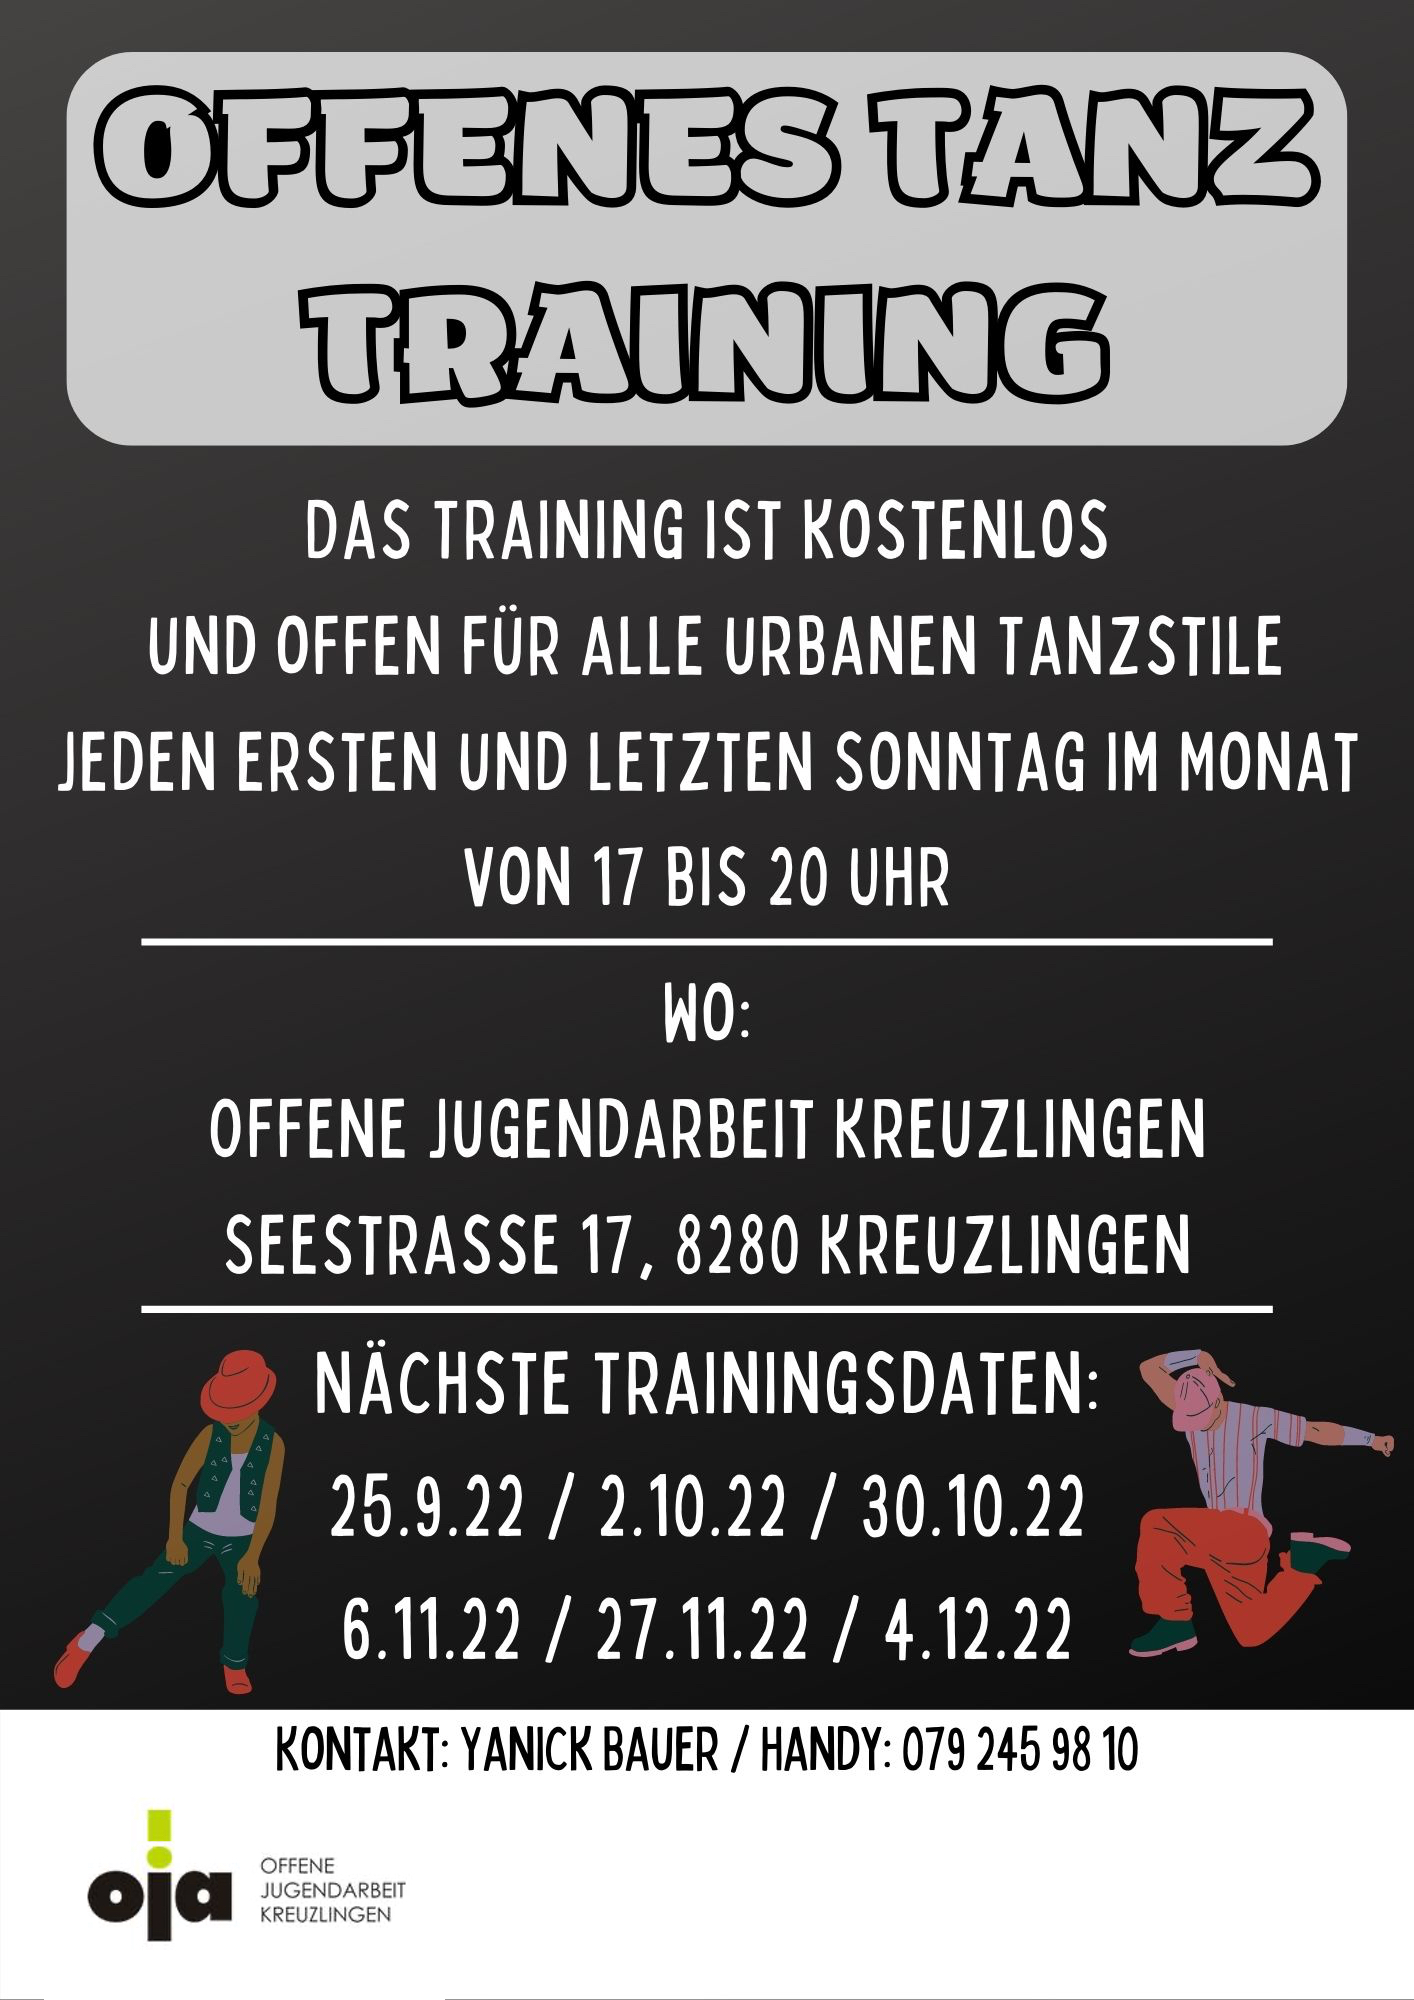 Offenes-Tanz-Training